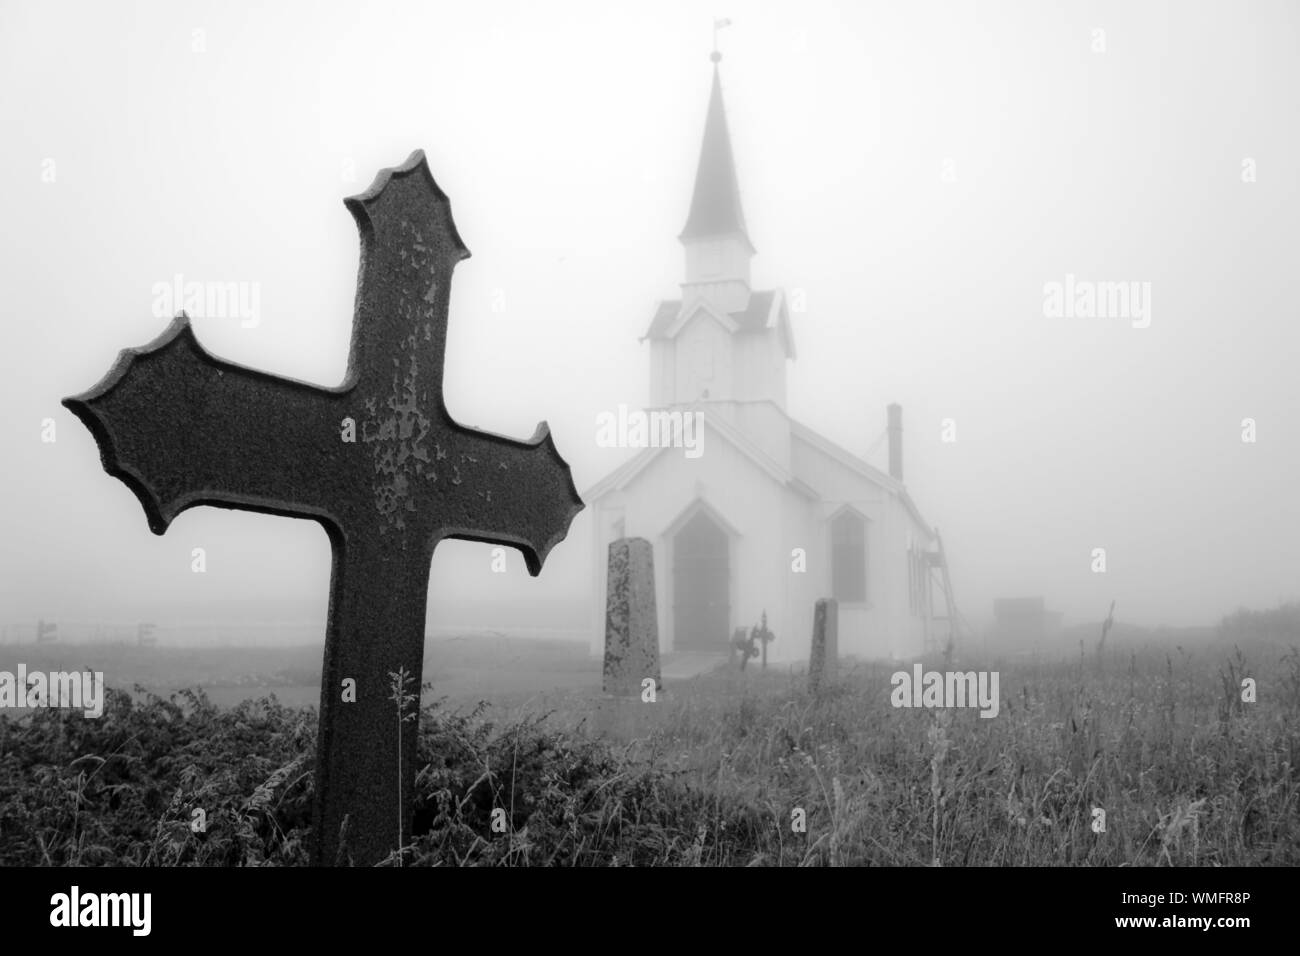 churchyard, old wooden church, graveyard, cemetery, grave, mysterious, obscure, fog, mist, foggy, misty, transience, Nesseby, Varanger, Norway Stock Photo